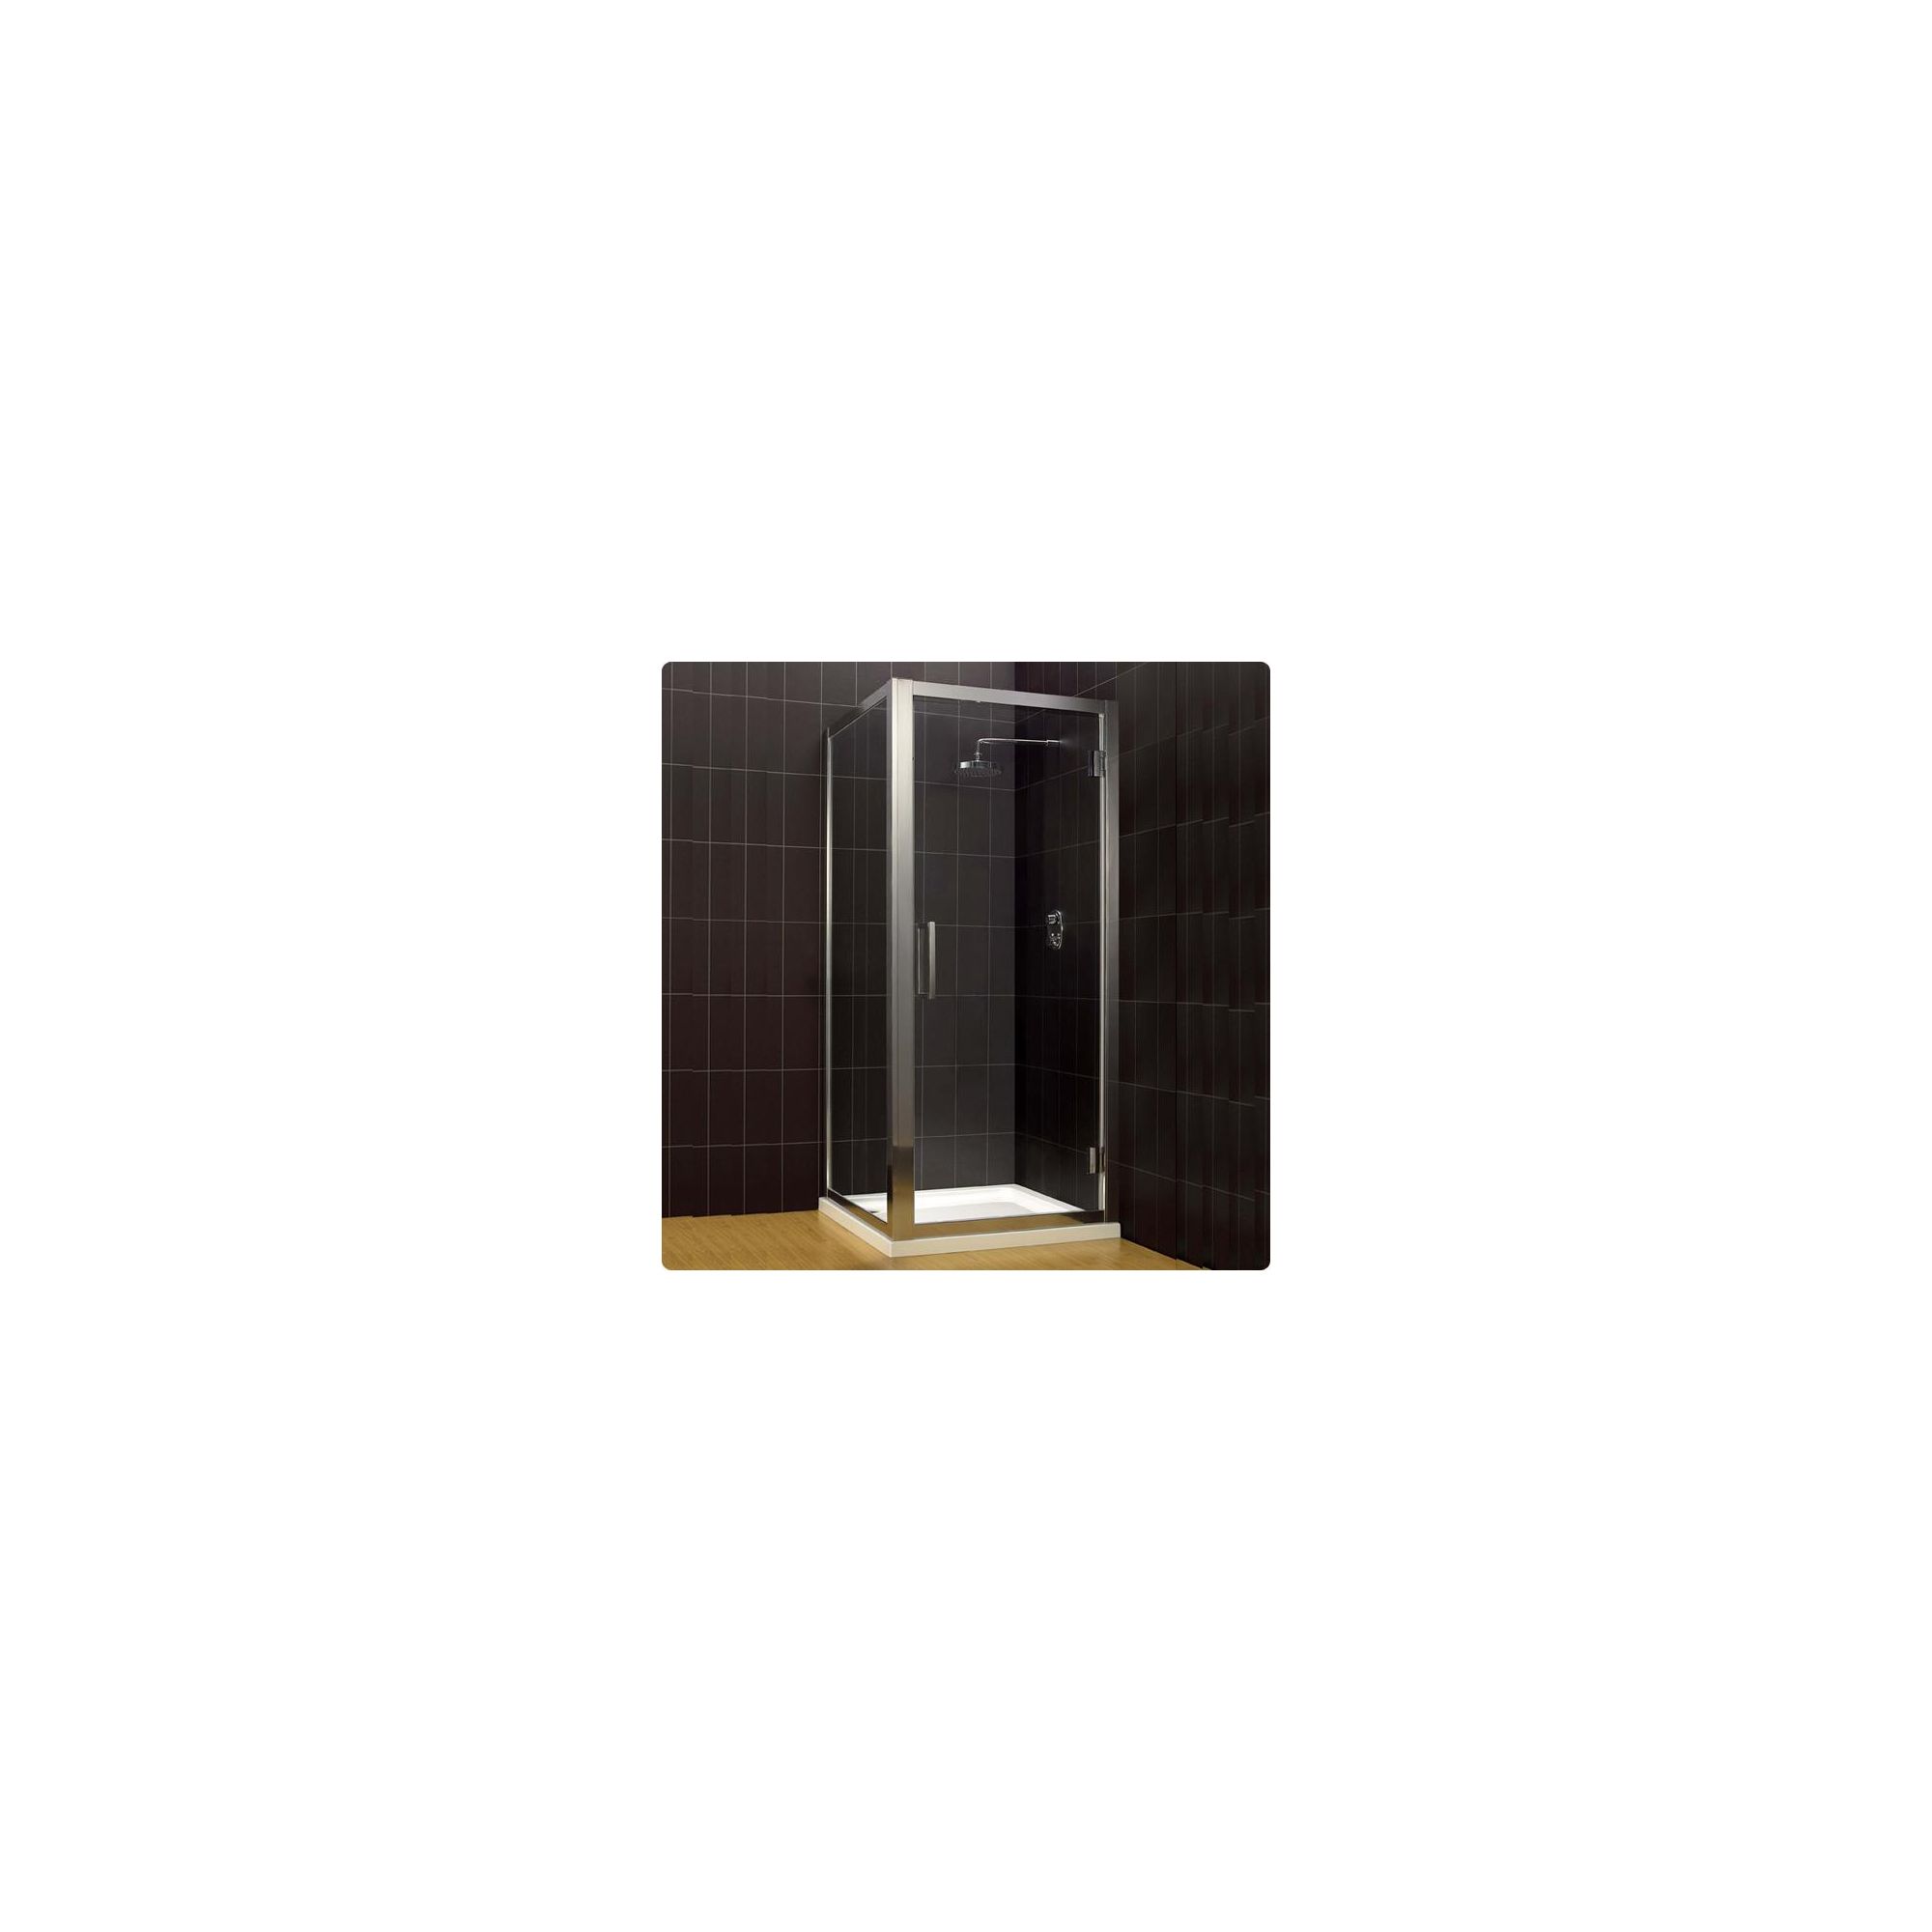 Duchy Supreme Silver Hinged Door Shower Enclosure, 1000mm x 760mm, Standard Tray, 8mm Glass at Tesco Direct